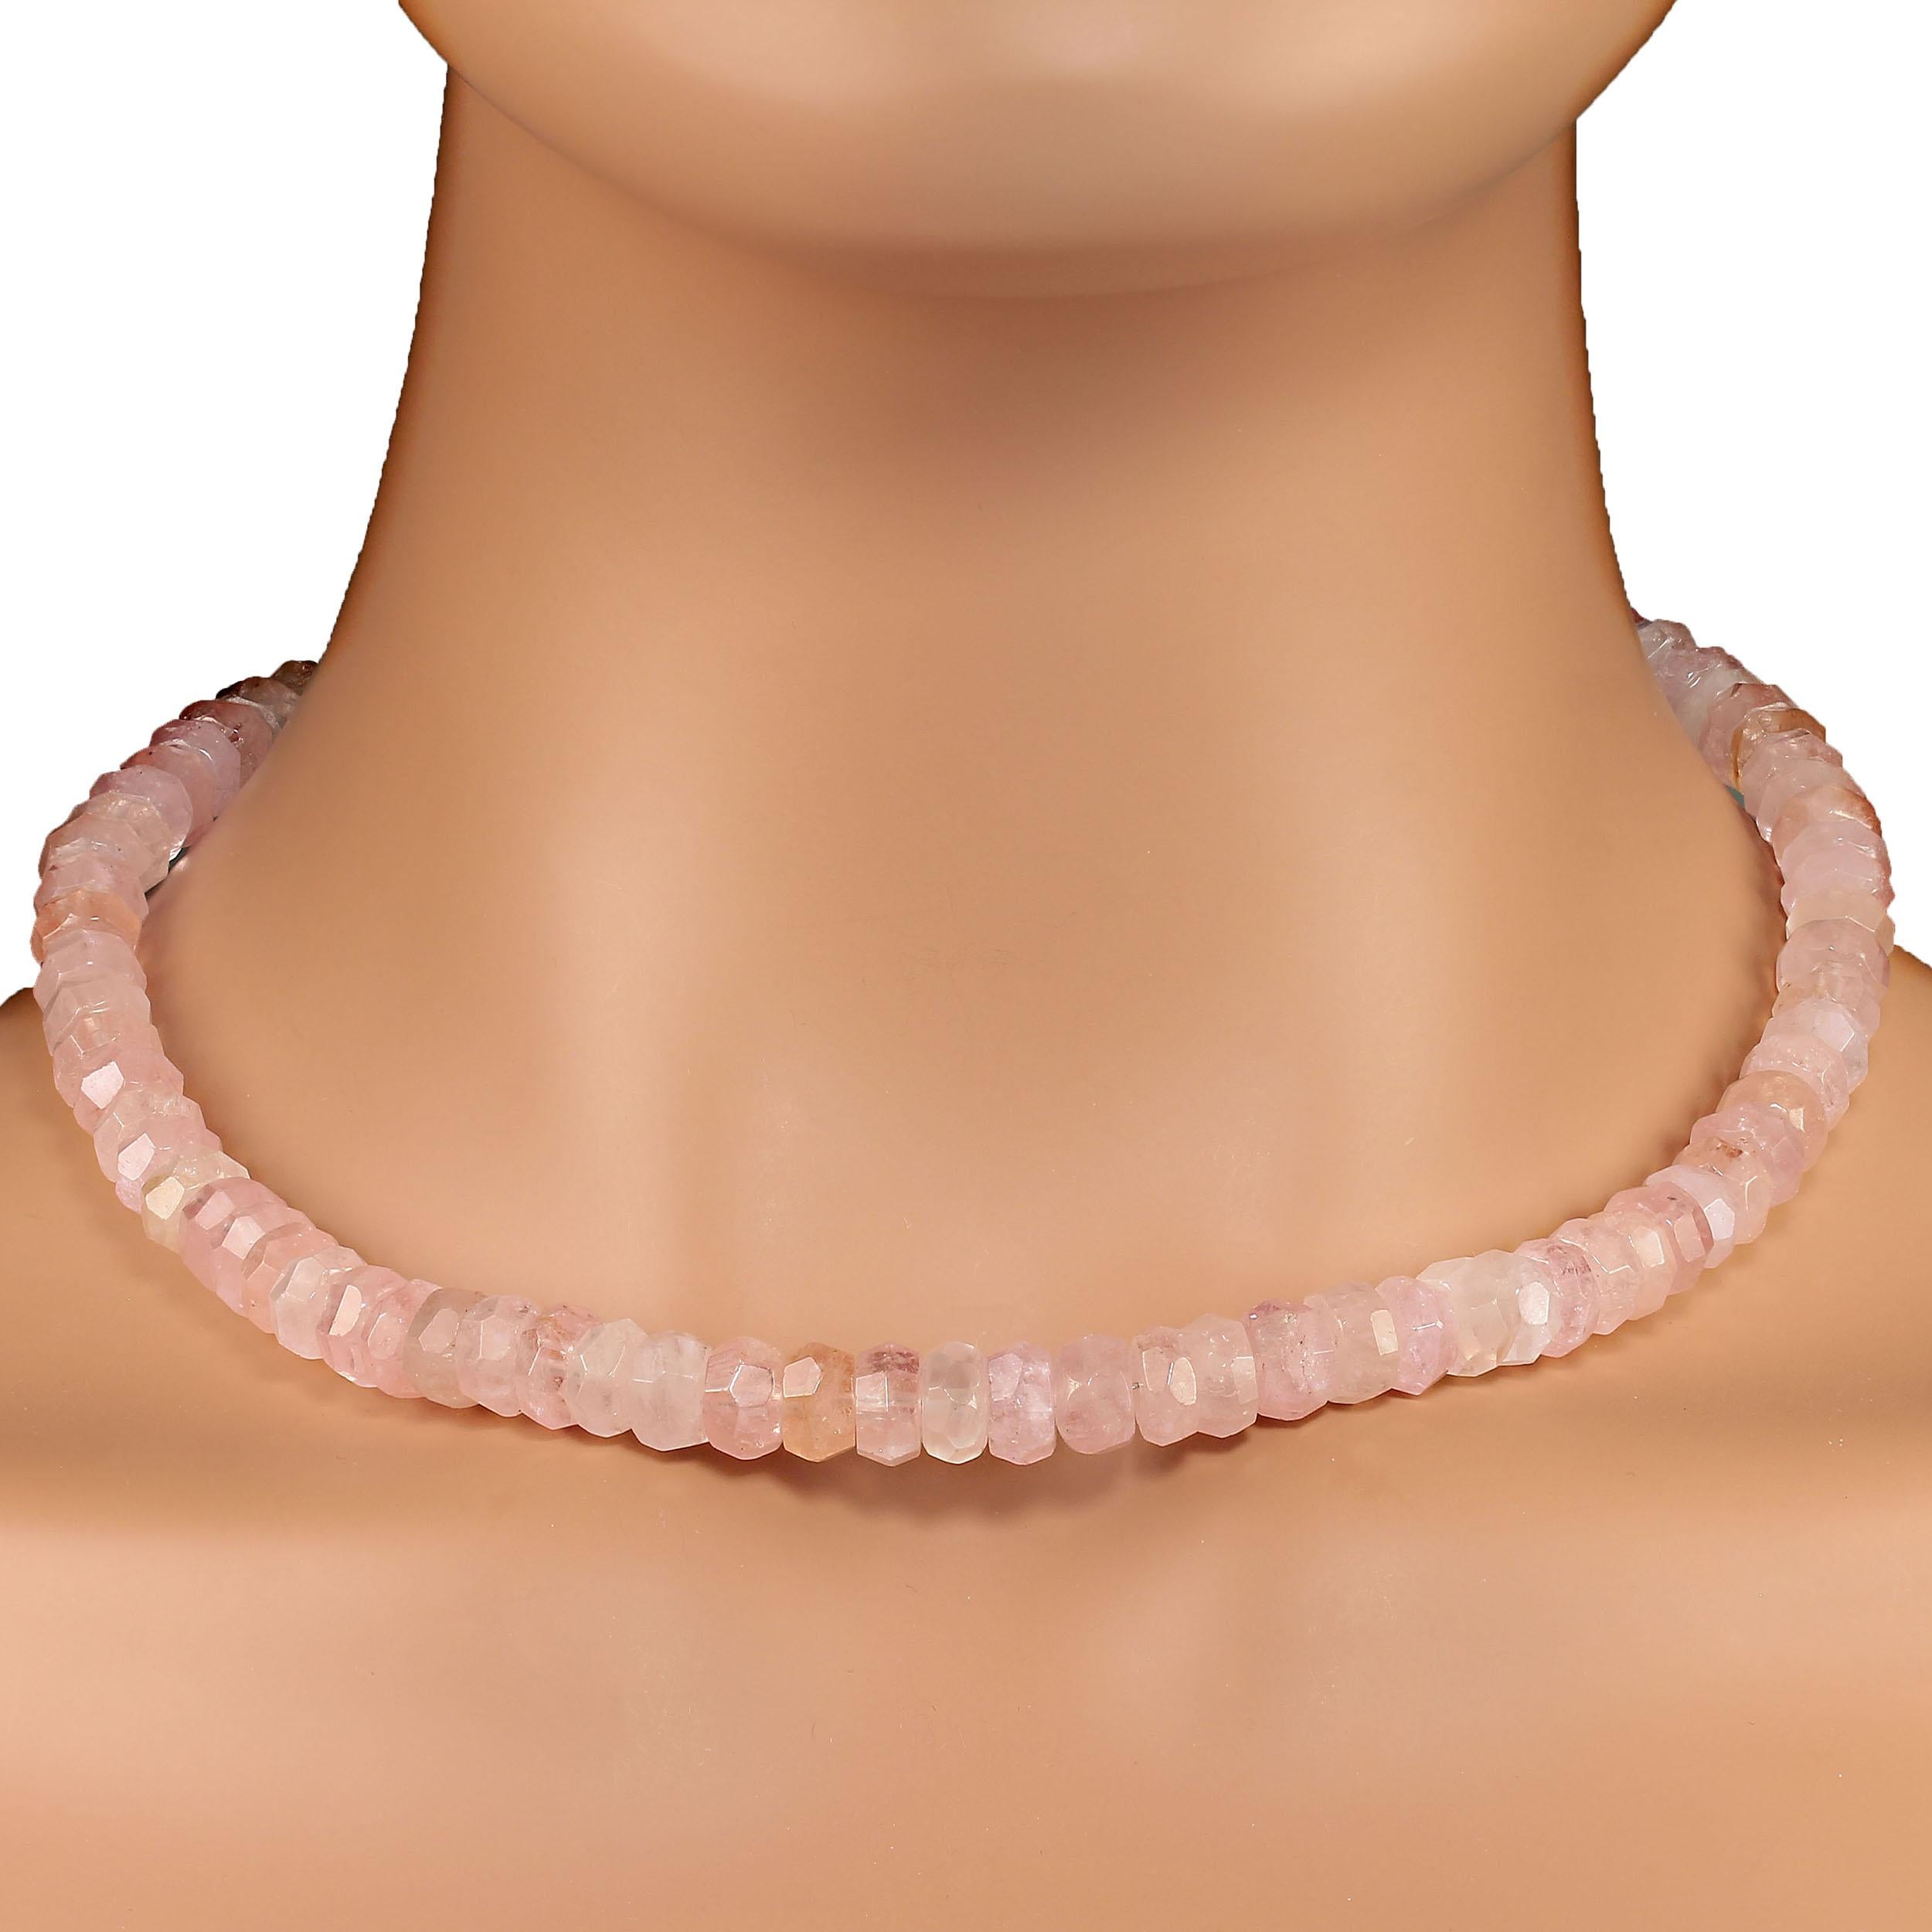 18 Inch Morganite necklace of faceted rondels with sterling silver hook and eye clasp.  These gorgeous 10x8 rondels are various shades of peachy pink. They are transparent to translucent. Morganite is always a great addition to your jewelry